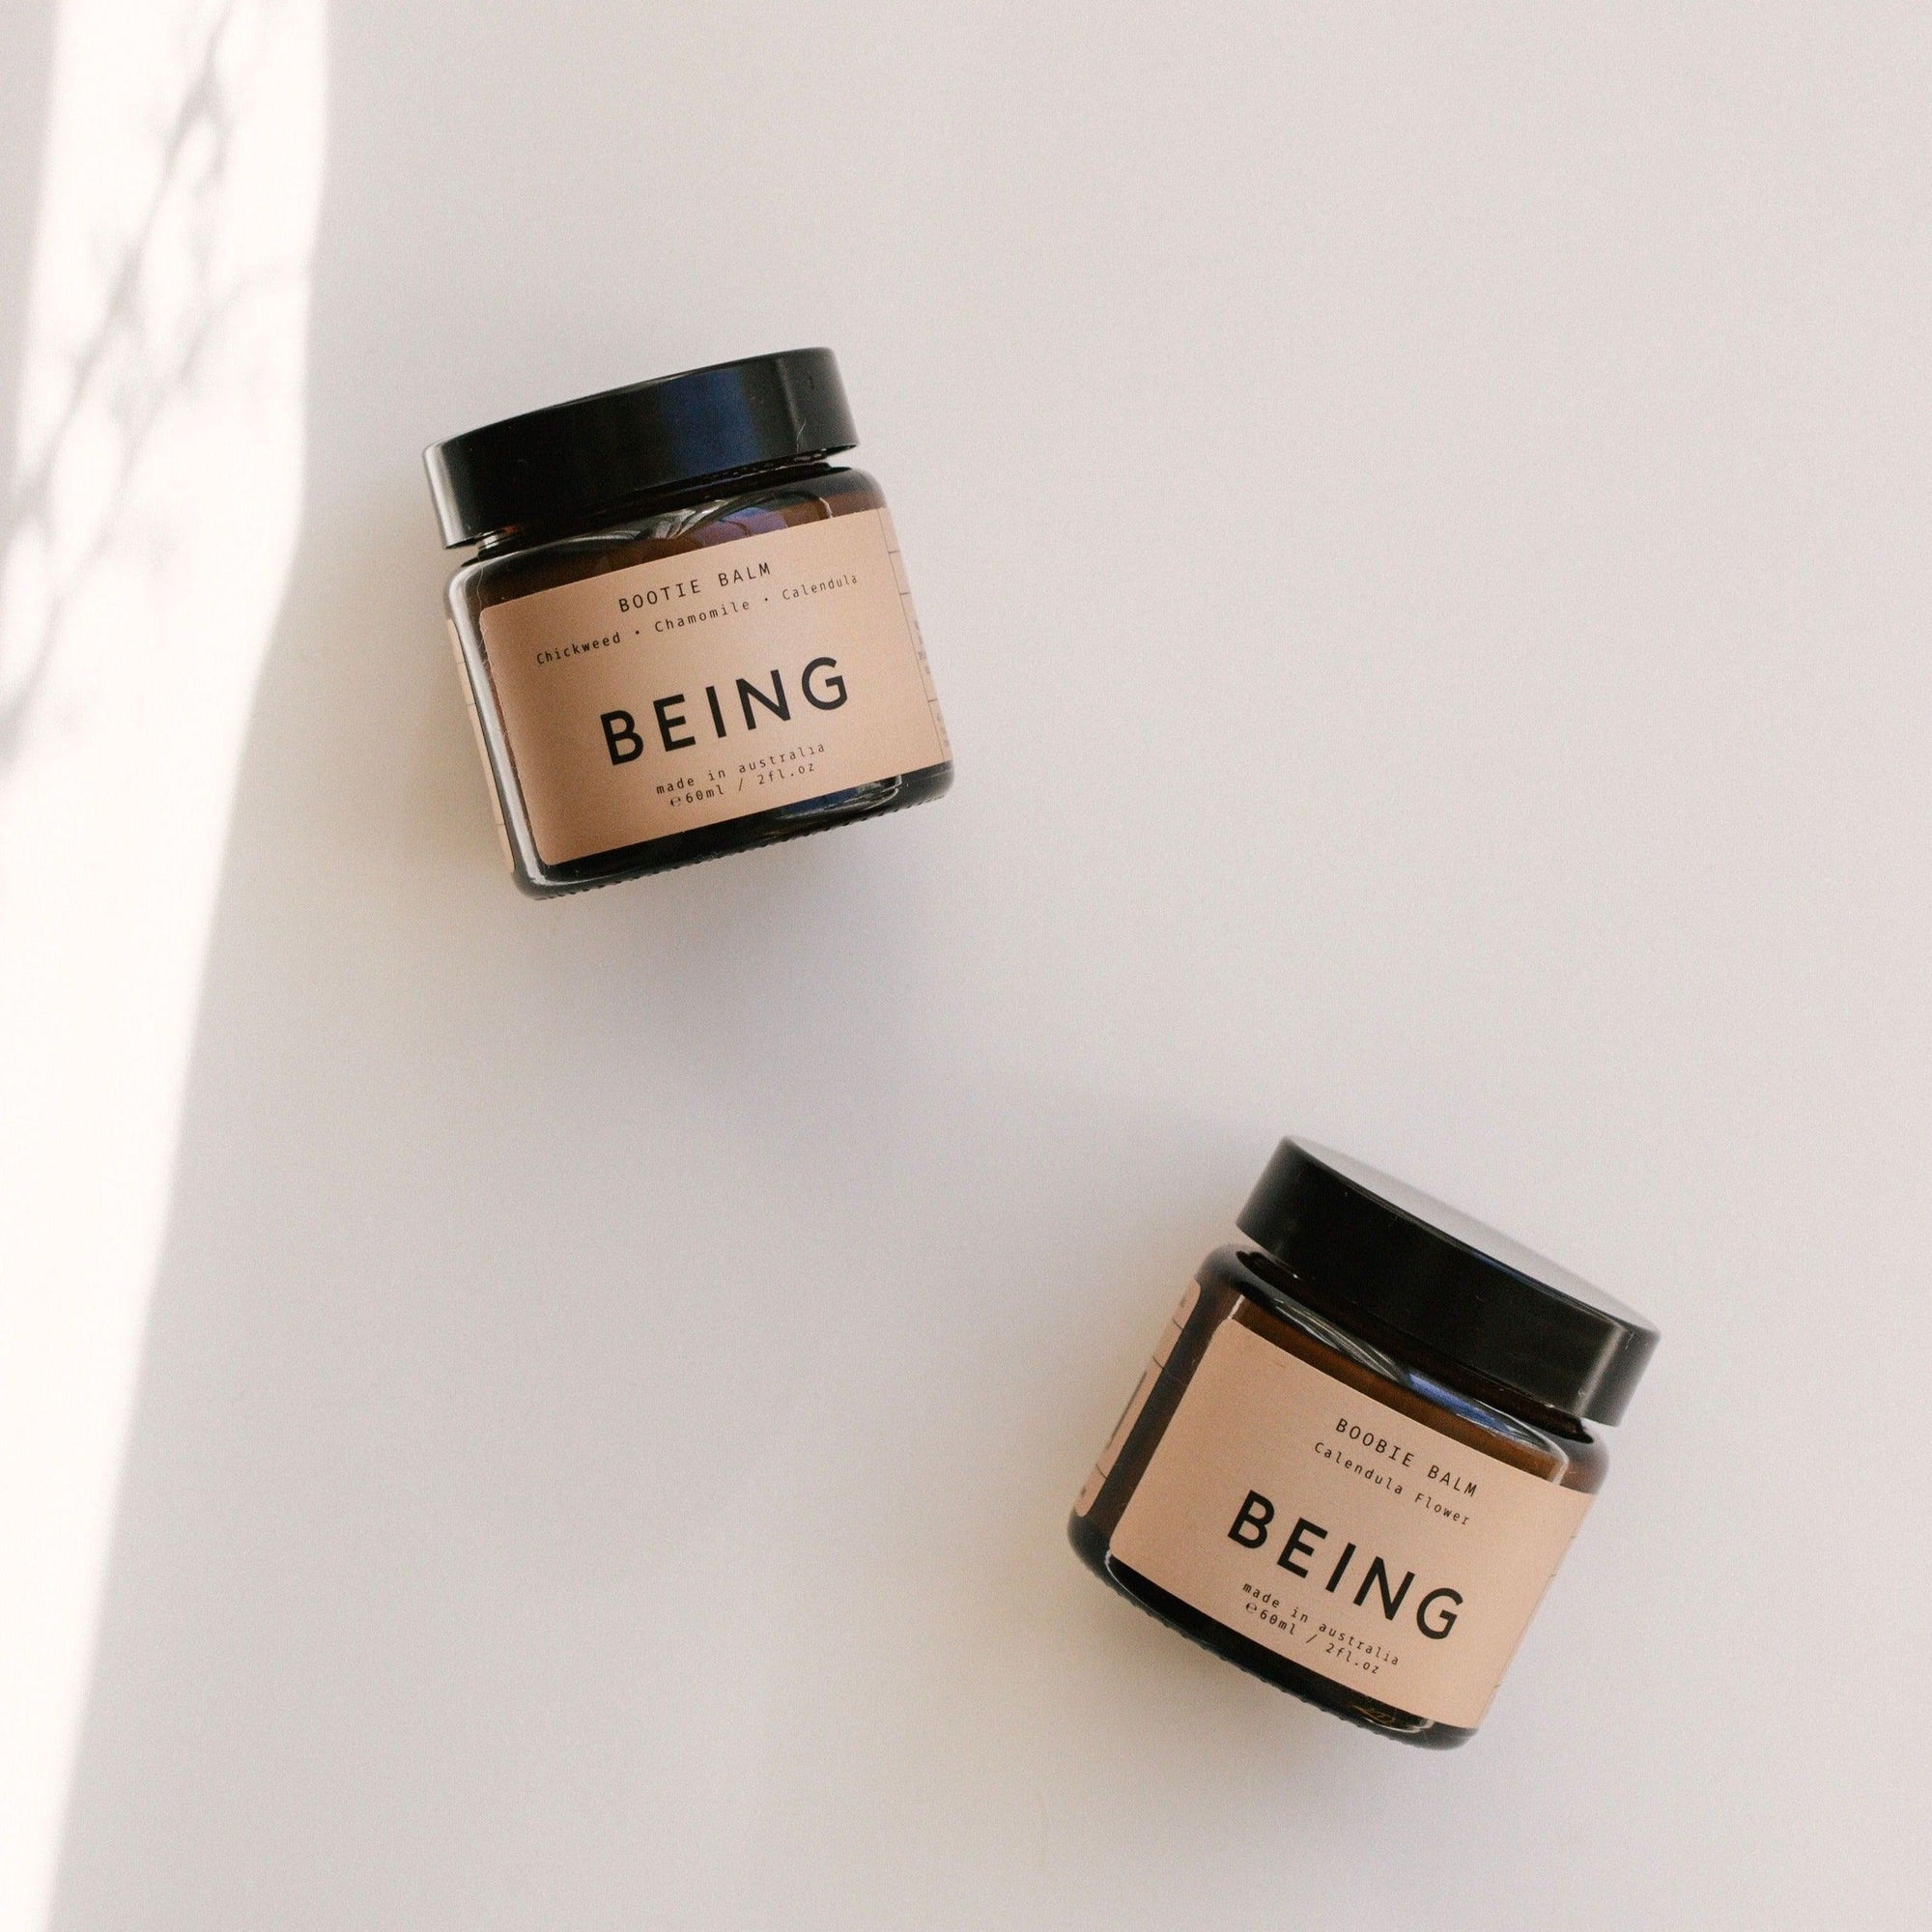 Two jars of the Being Skincare balm duo set.